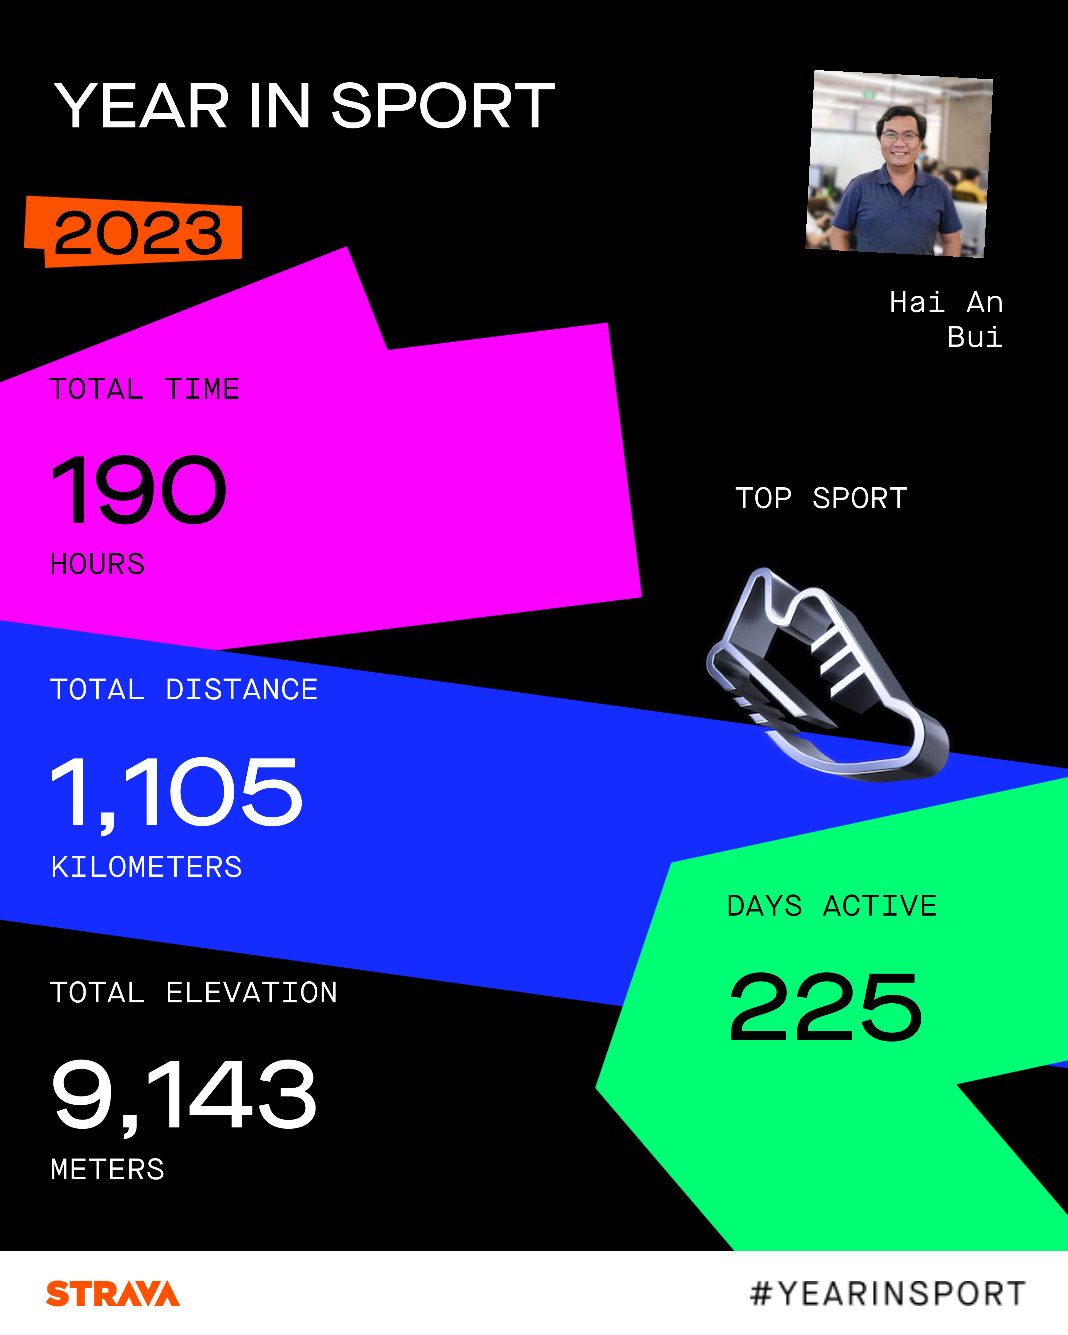 May be an image of 1 person, digital watch and text that says "YEAR IN SPORT 2023 TOTAL TIME HaiAn Hai Bui 190 HOURS TOP SPORT TOTAL DISTANCE 1,105 KILOMETERS TOTAL ELEVATION DAYSACTIE DAYS ACTIVE 225 9,143 METERS STRAVA #YEARINSPORT"